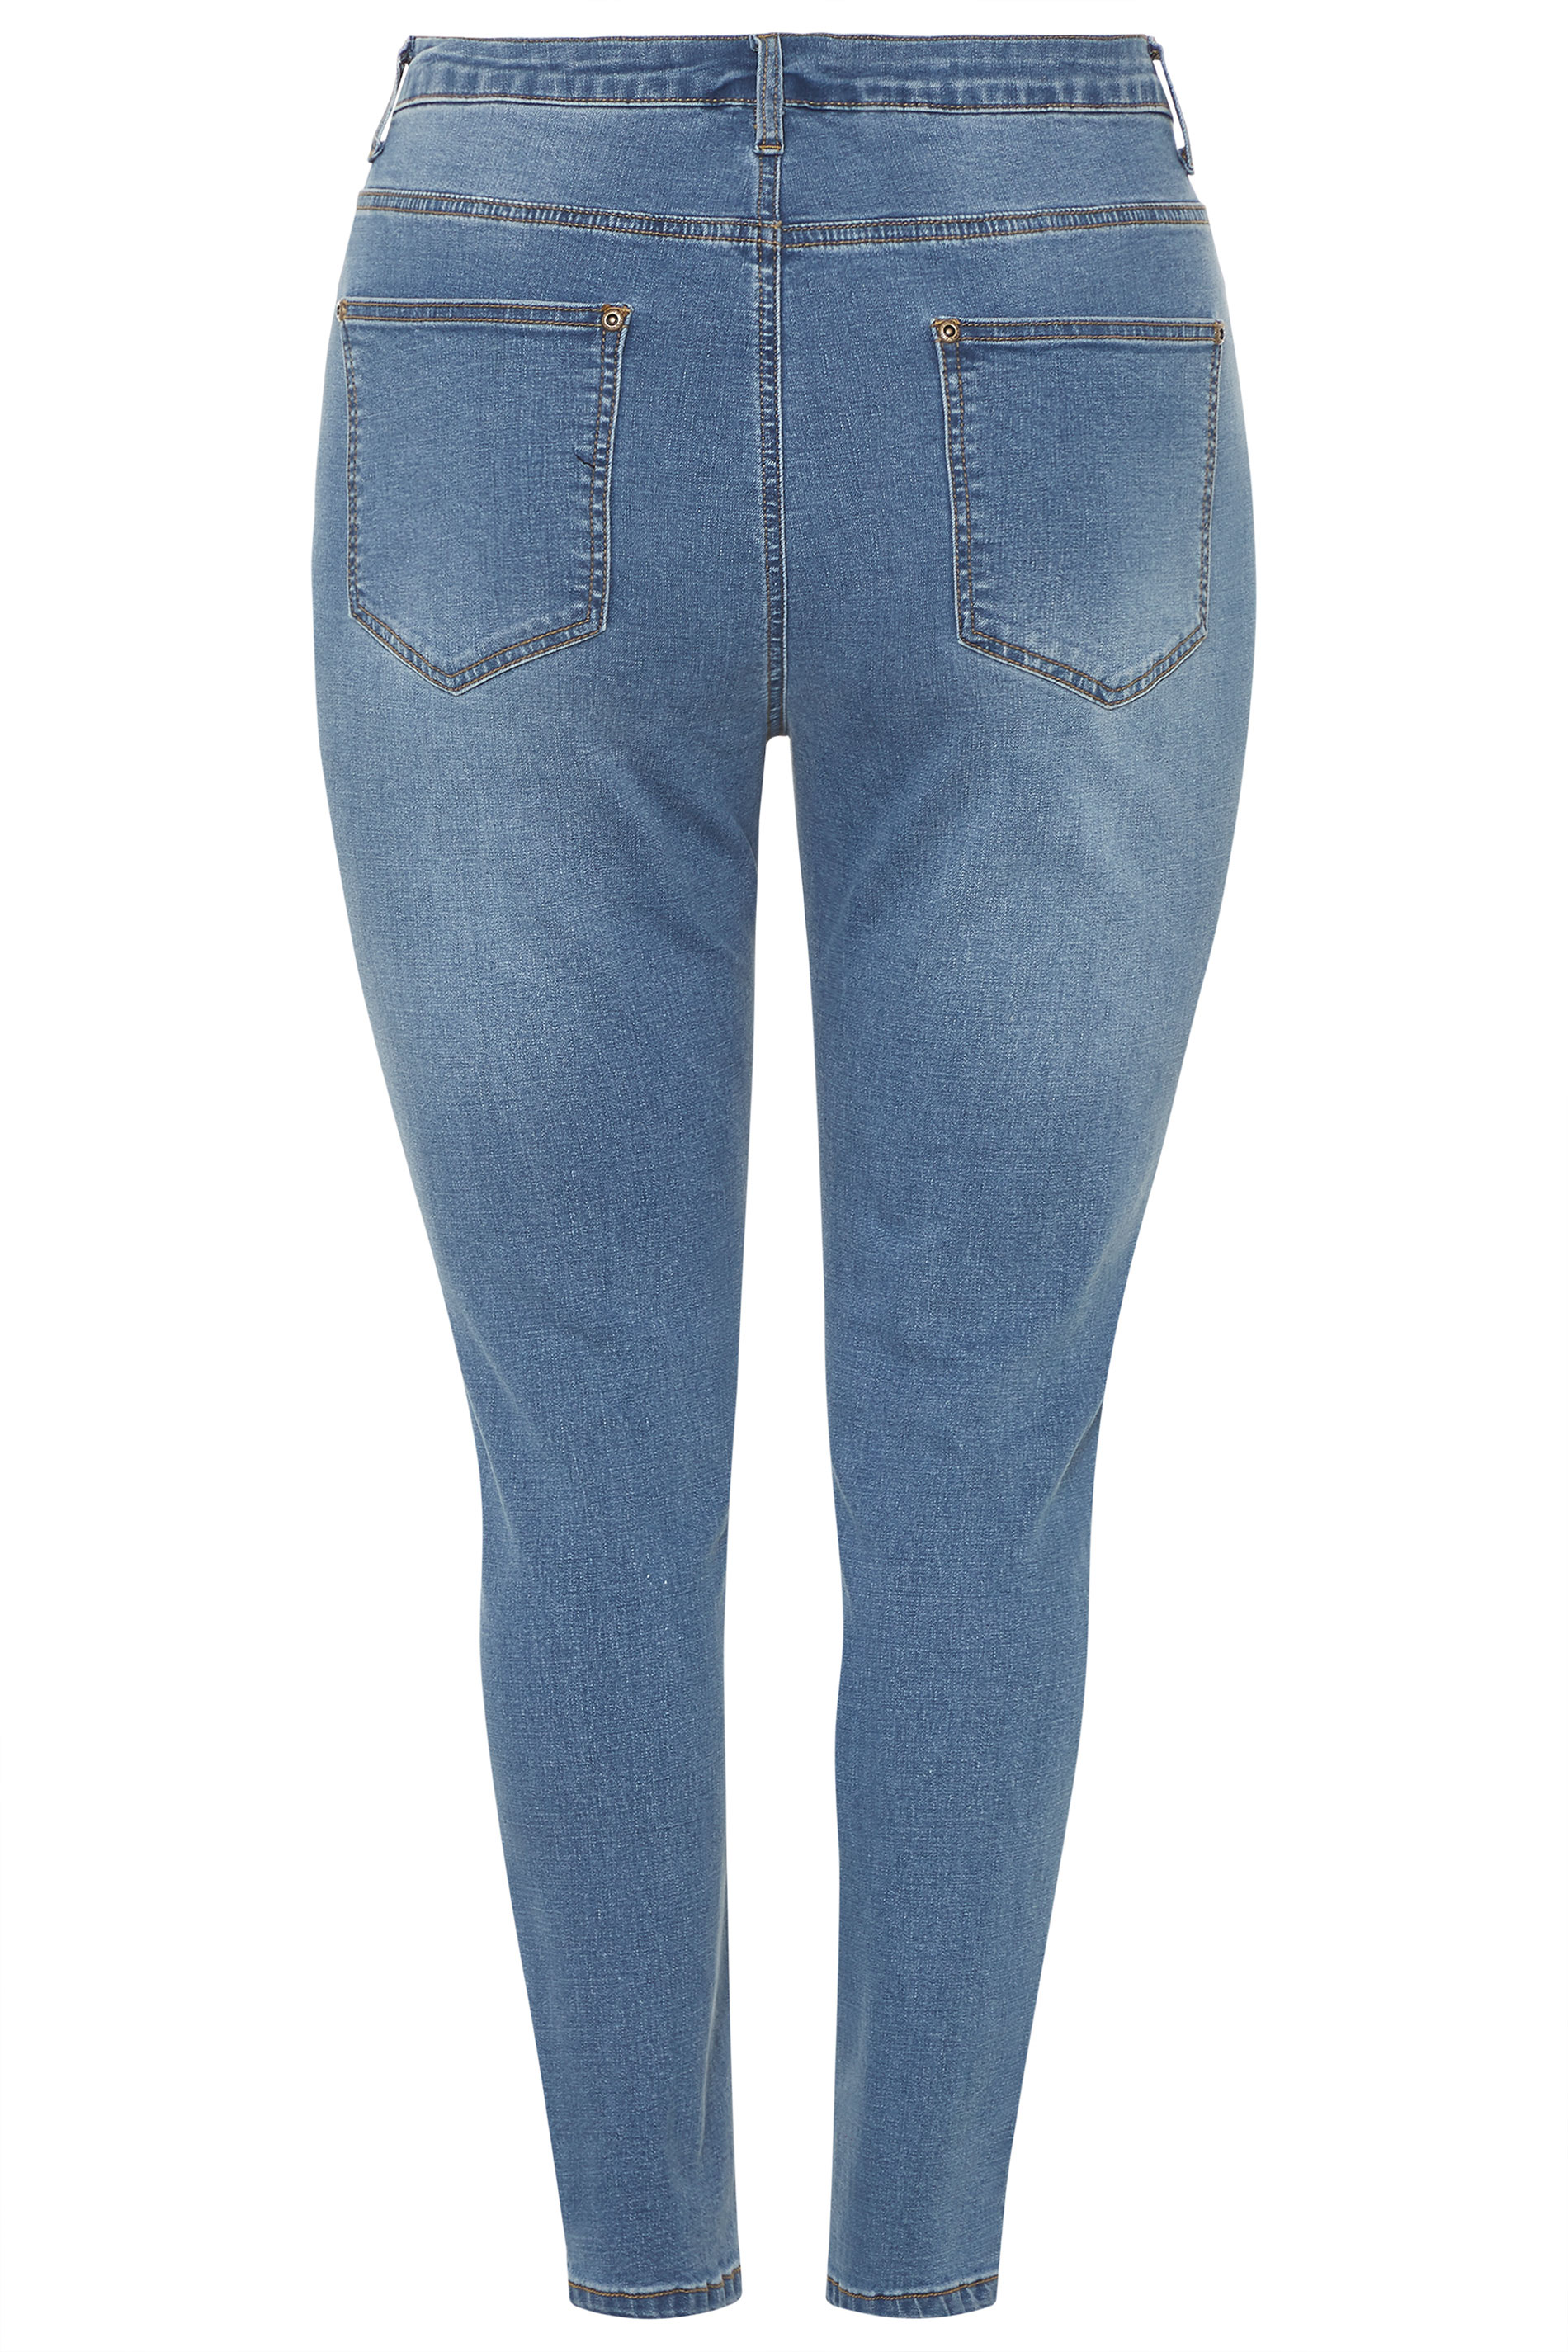 Mid Blue Skinny Ripped AVA Jeans | Yours Clothing